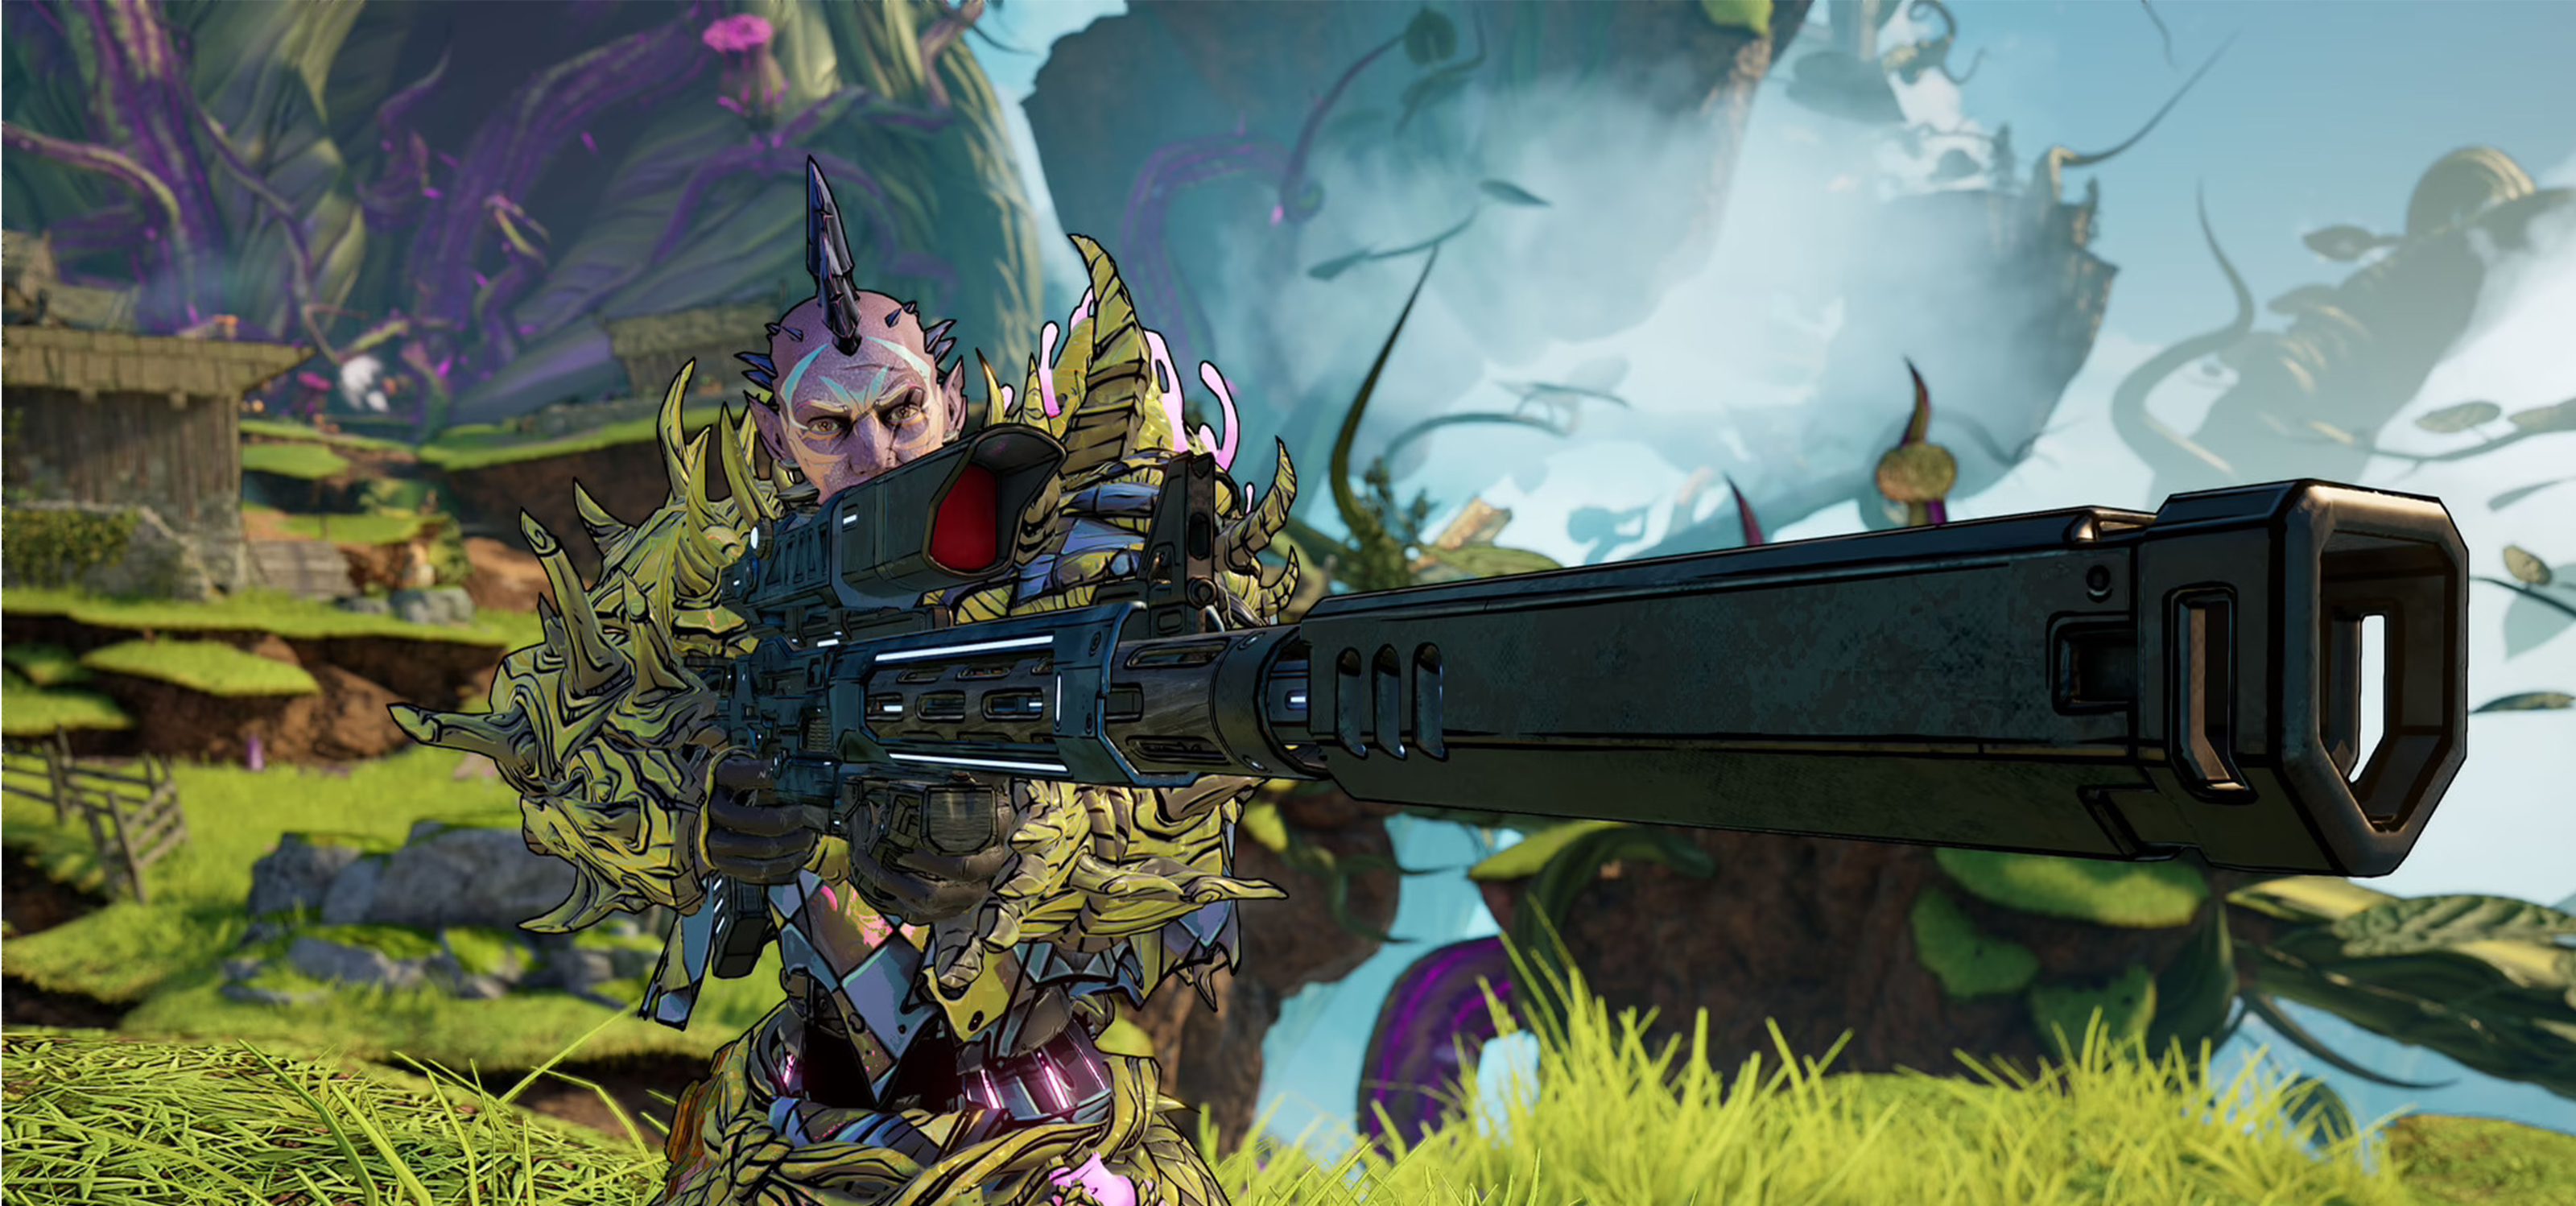 A fantasy character with spiky armor and a mohawk holds a large rifle.